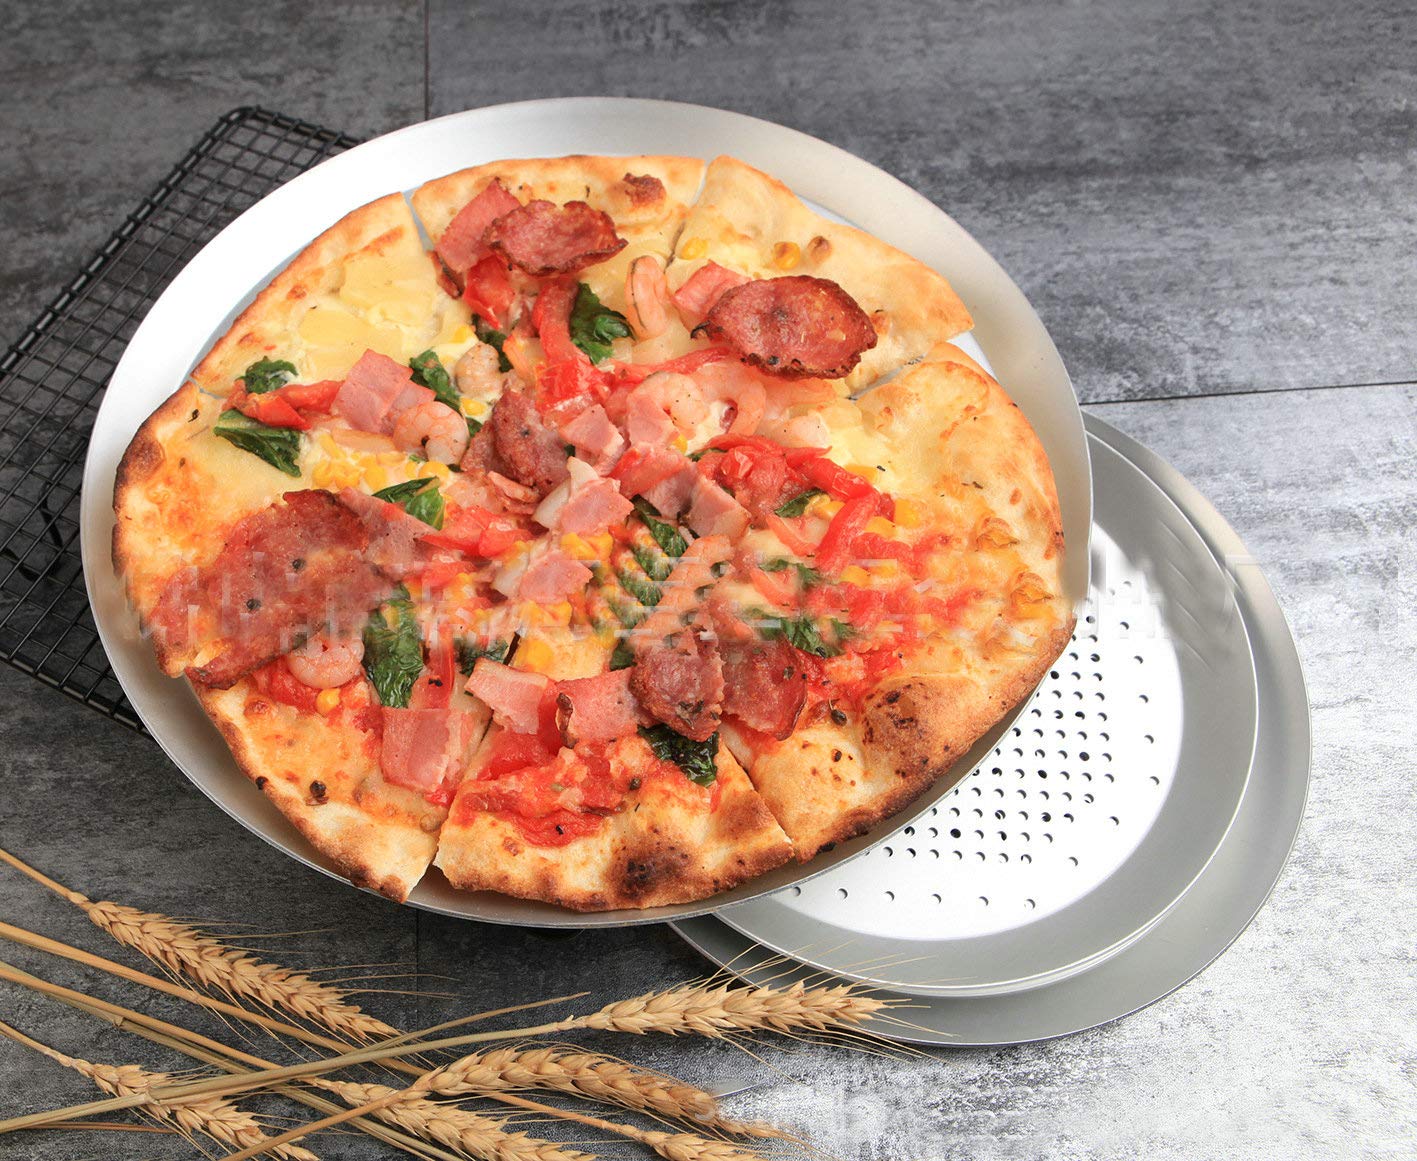 Pizza Pan 9 Inch, Non-stick Vented Pizza Baking Tray With Holes, Round Pizza Oven Tray Tools Kitchen Cooking Pan